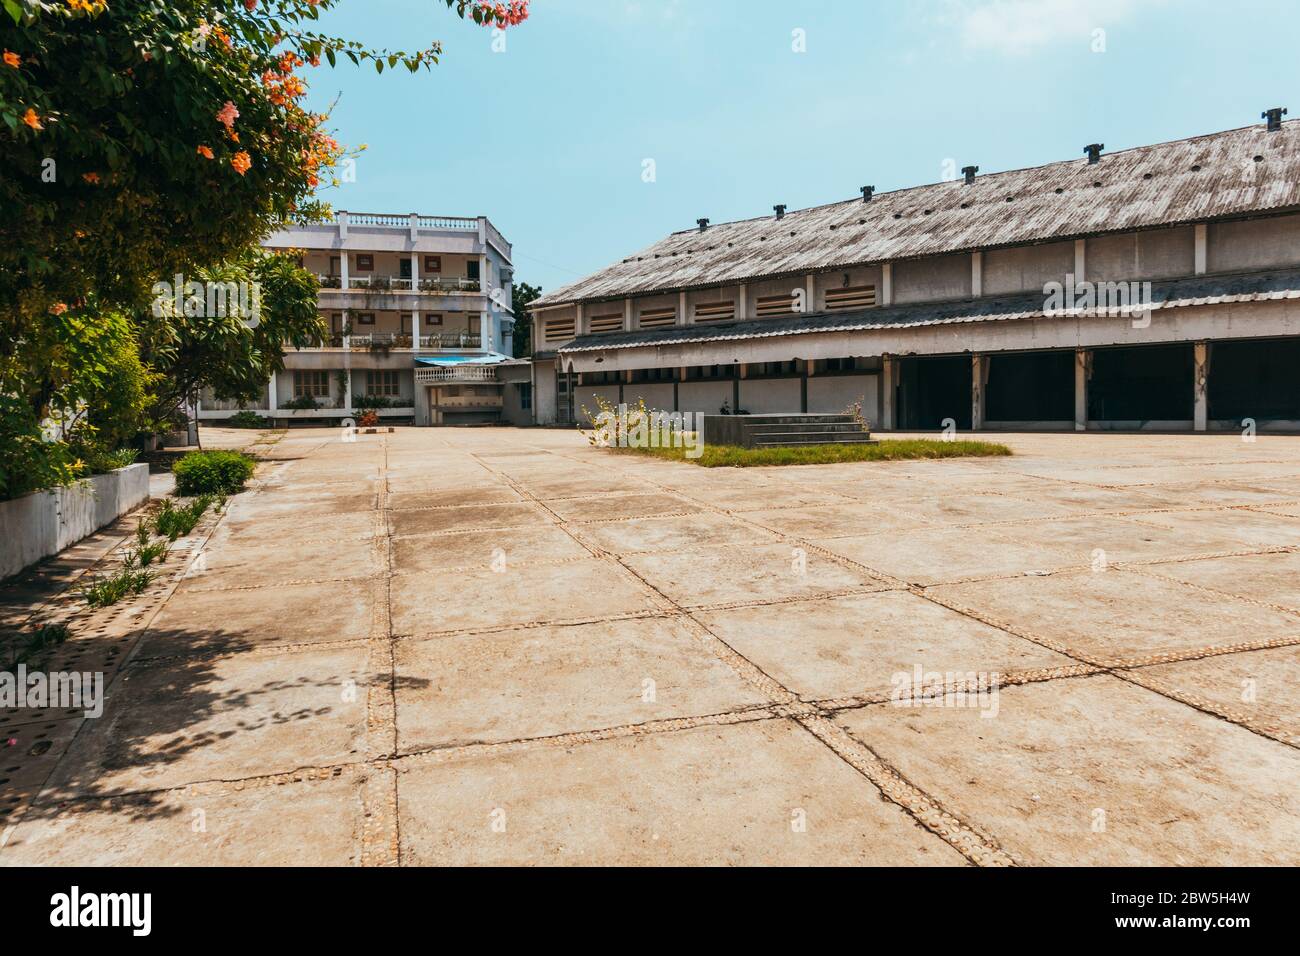 A school grounds in Pondicherry, India Stock Photo